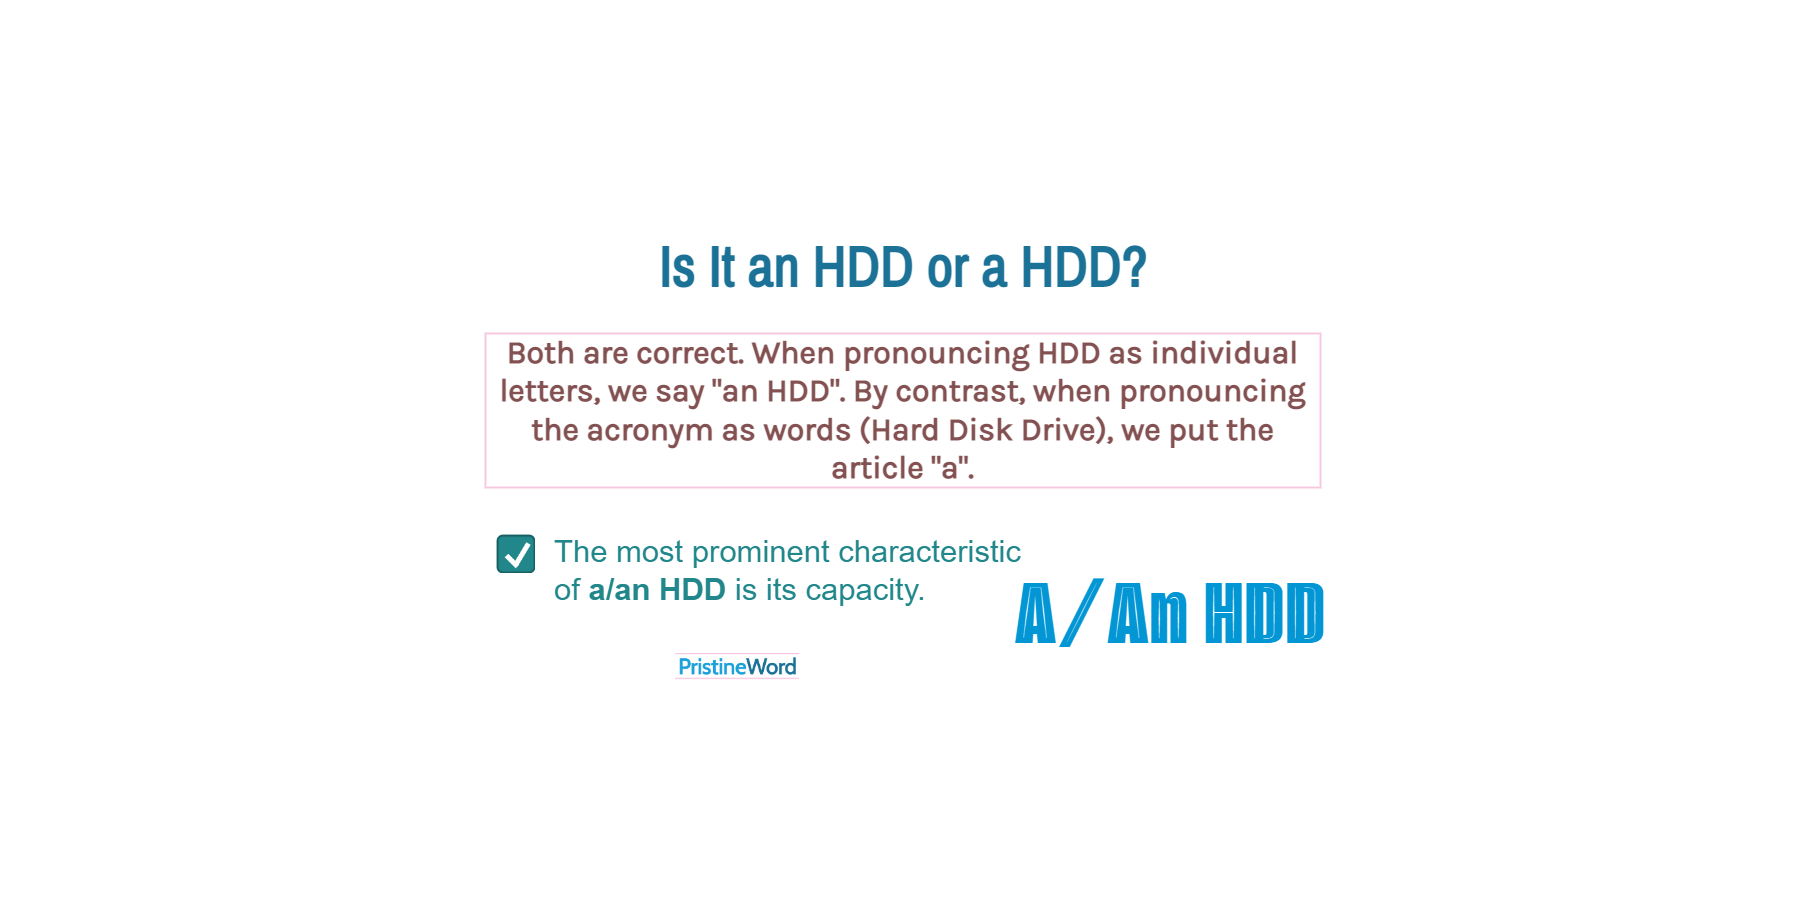 Is It a HDD or an HDD?